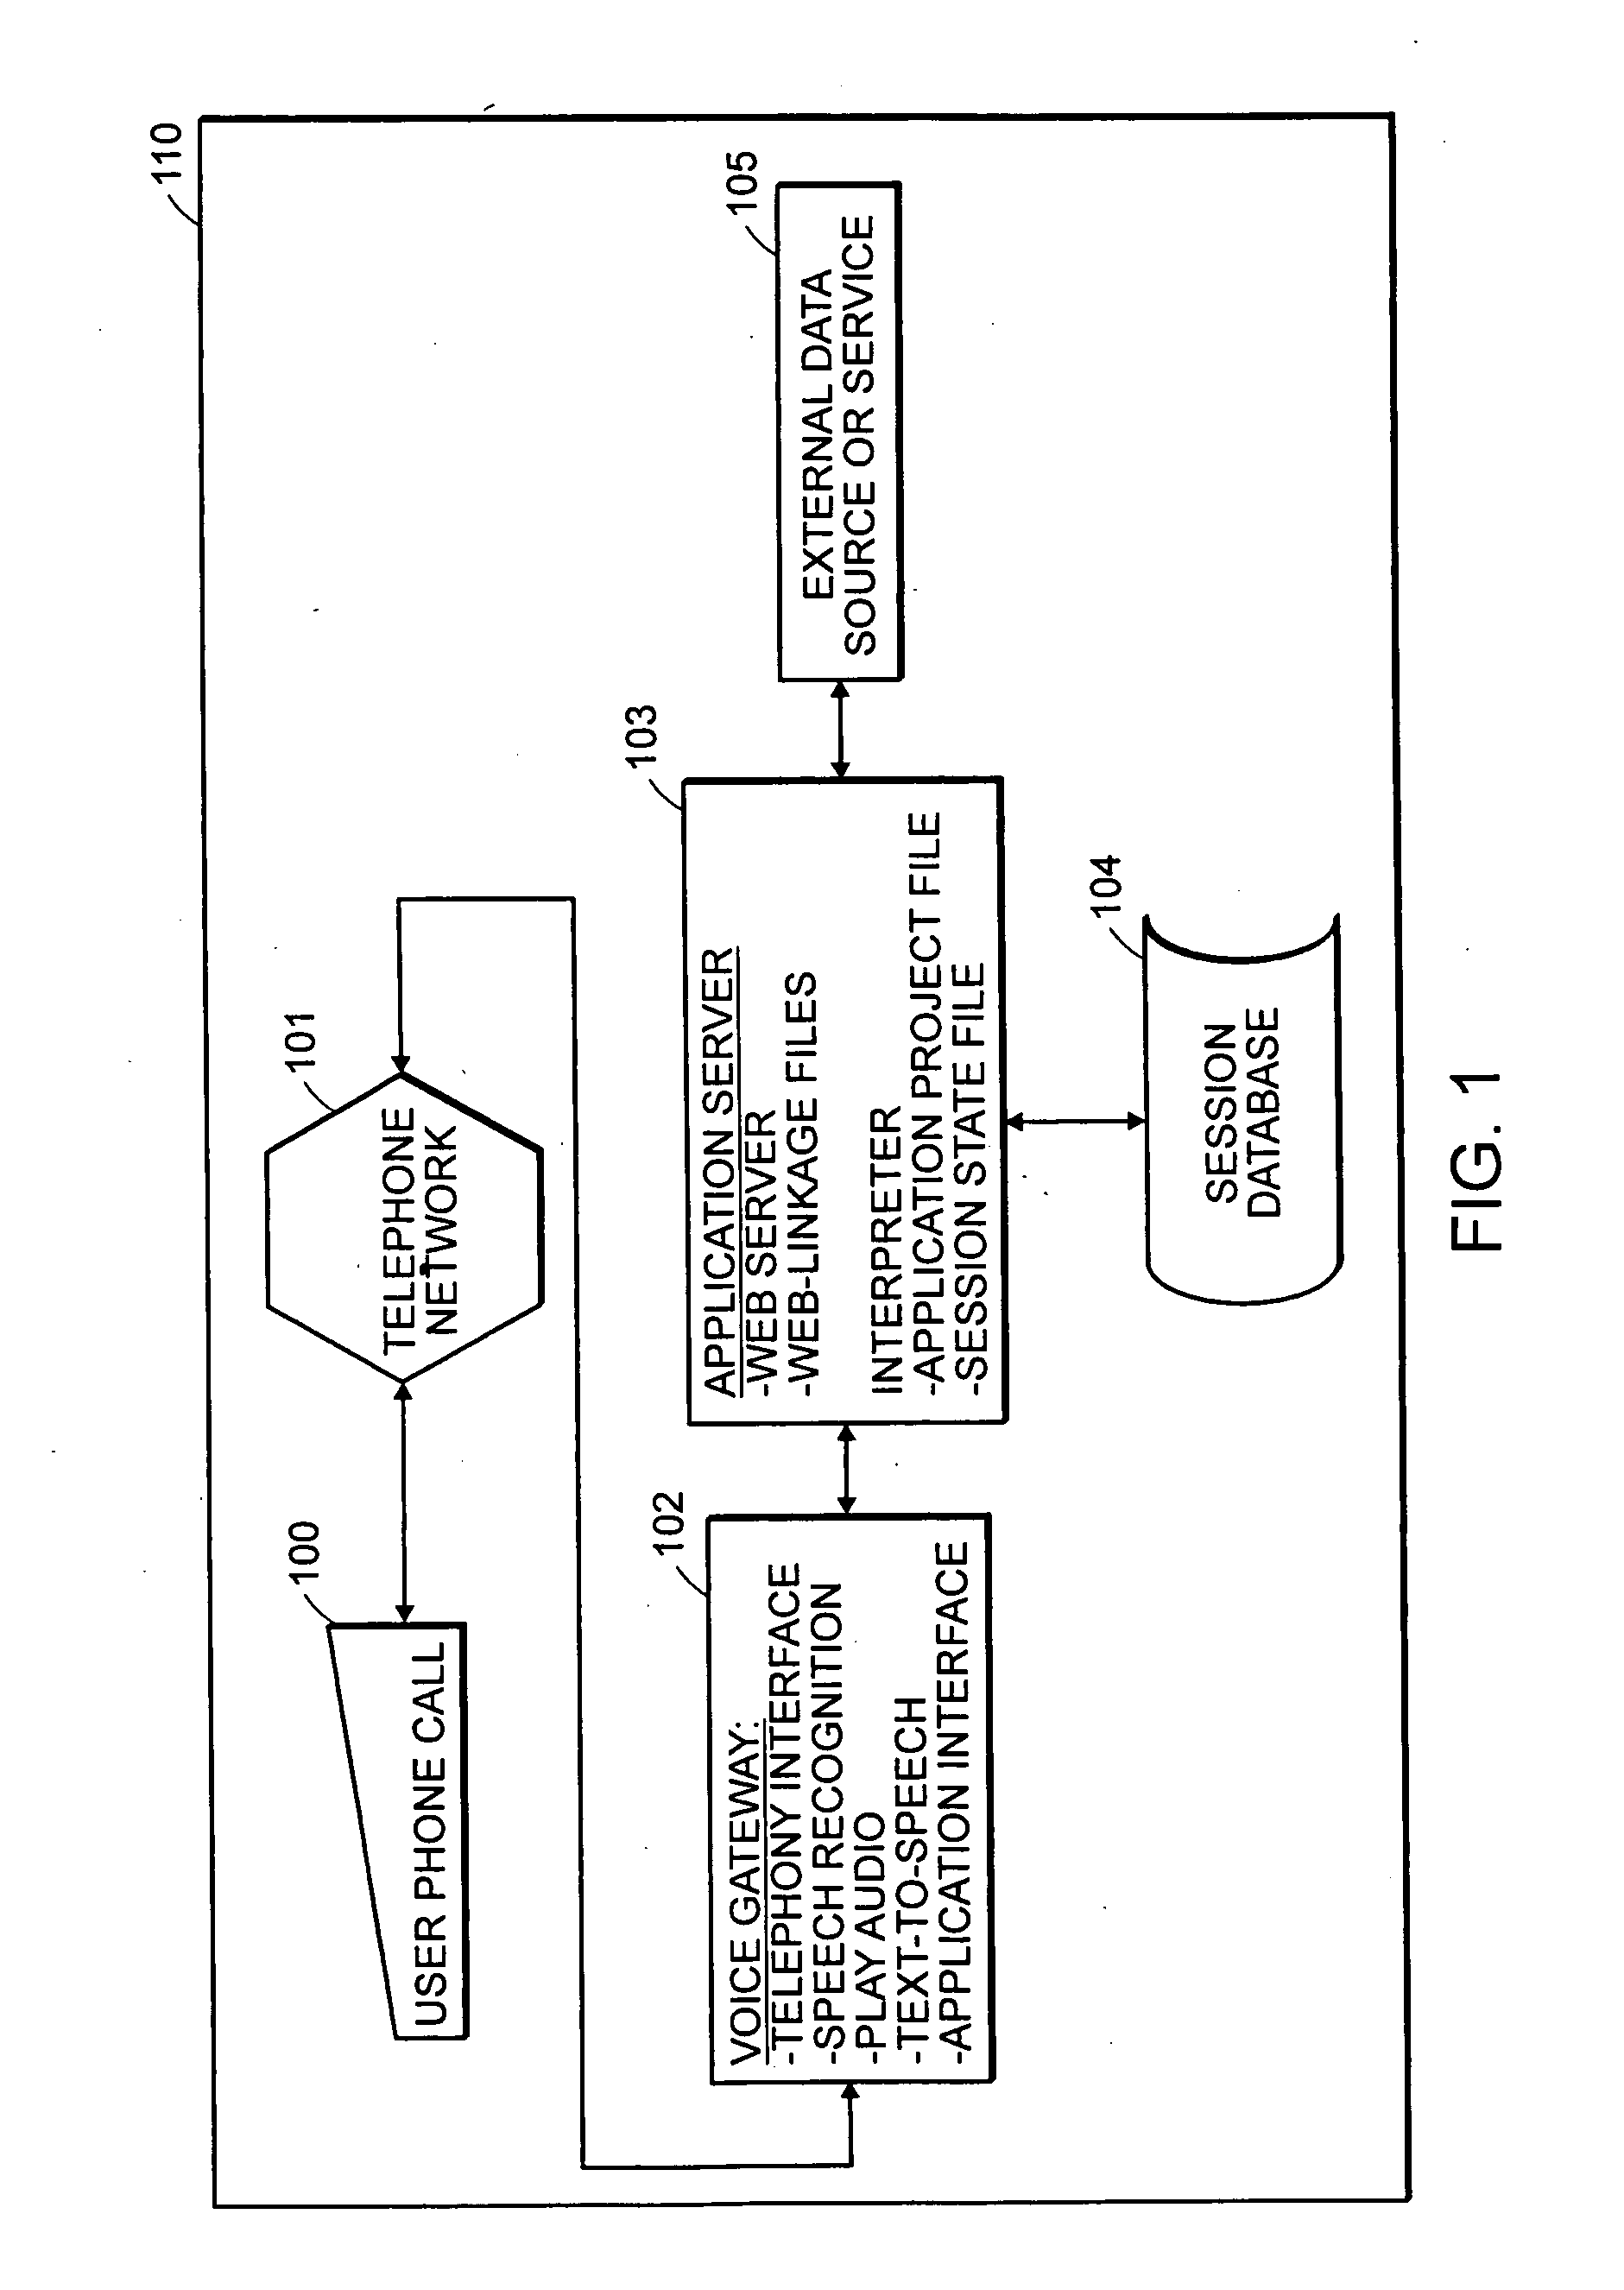 System and method for optimizing processing speed to run multiple dialogs between multiple users and a virtual agent